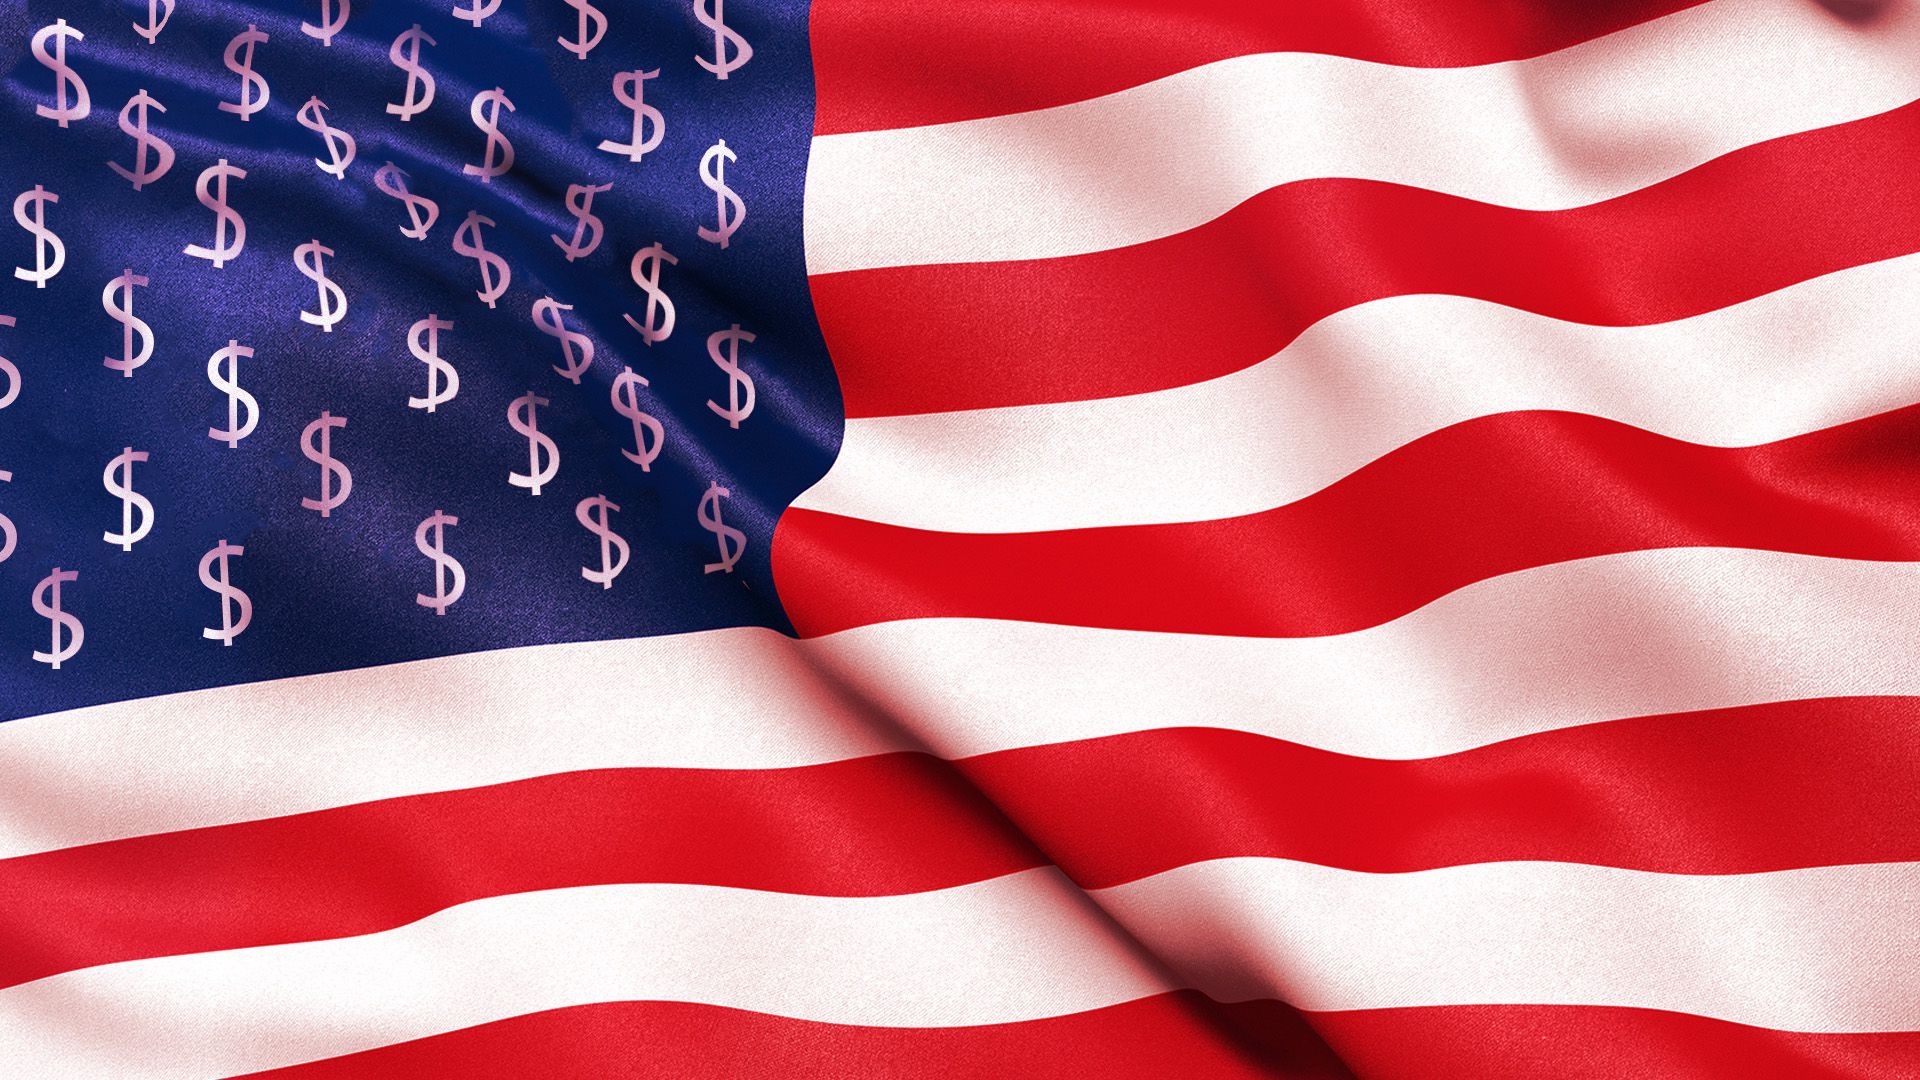 Illustration of the United States flag with the stars replaced by dollar signs.